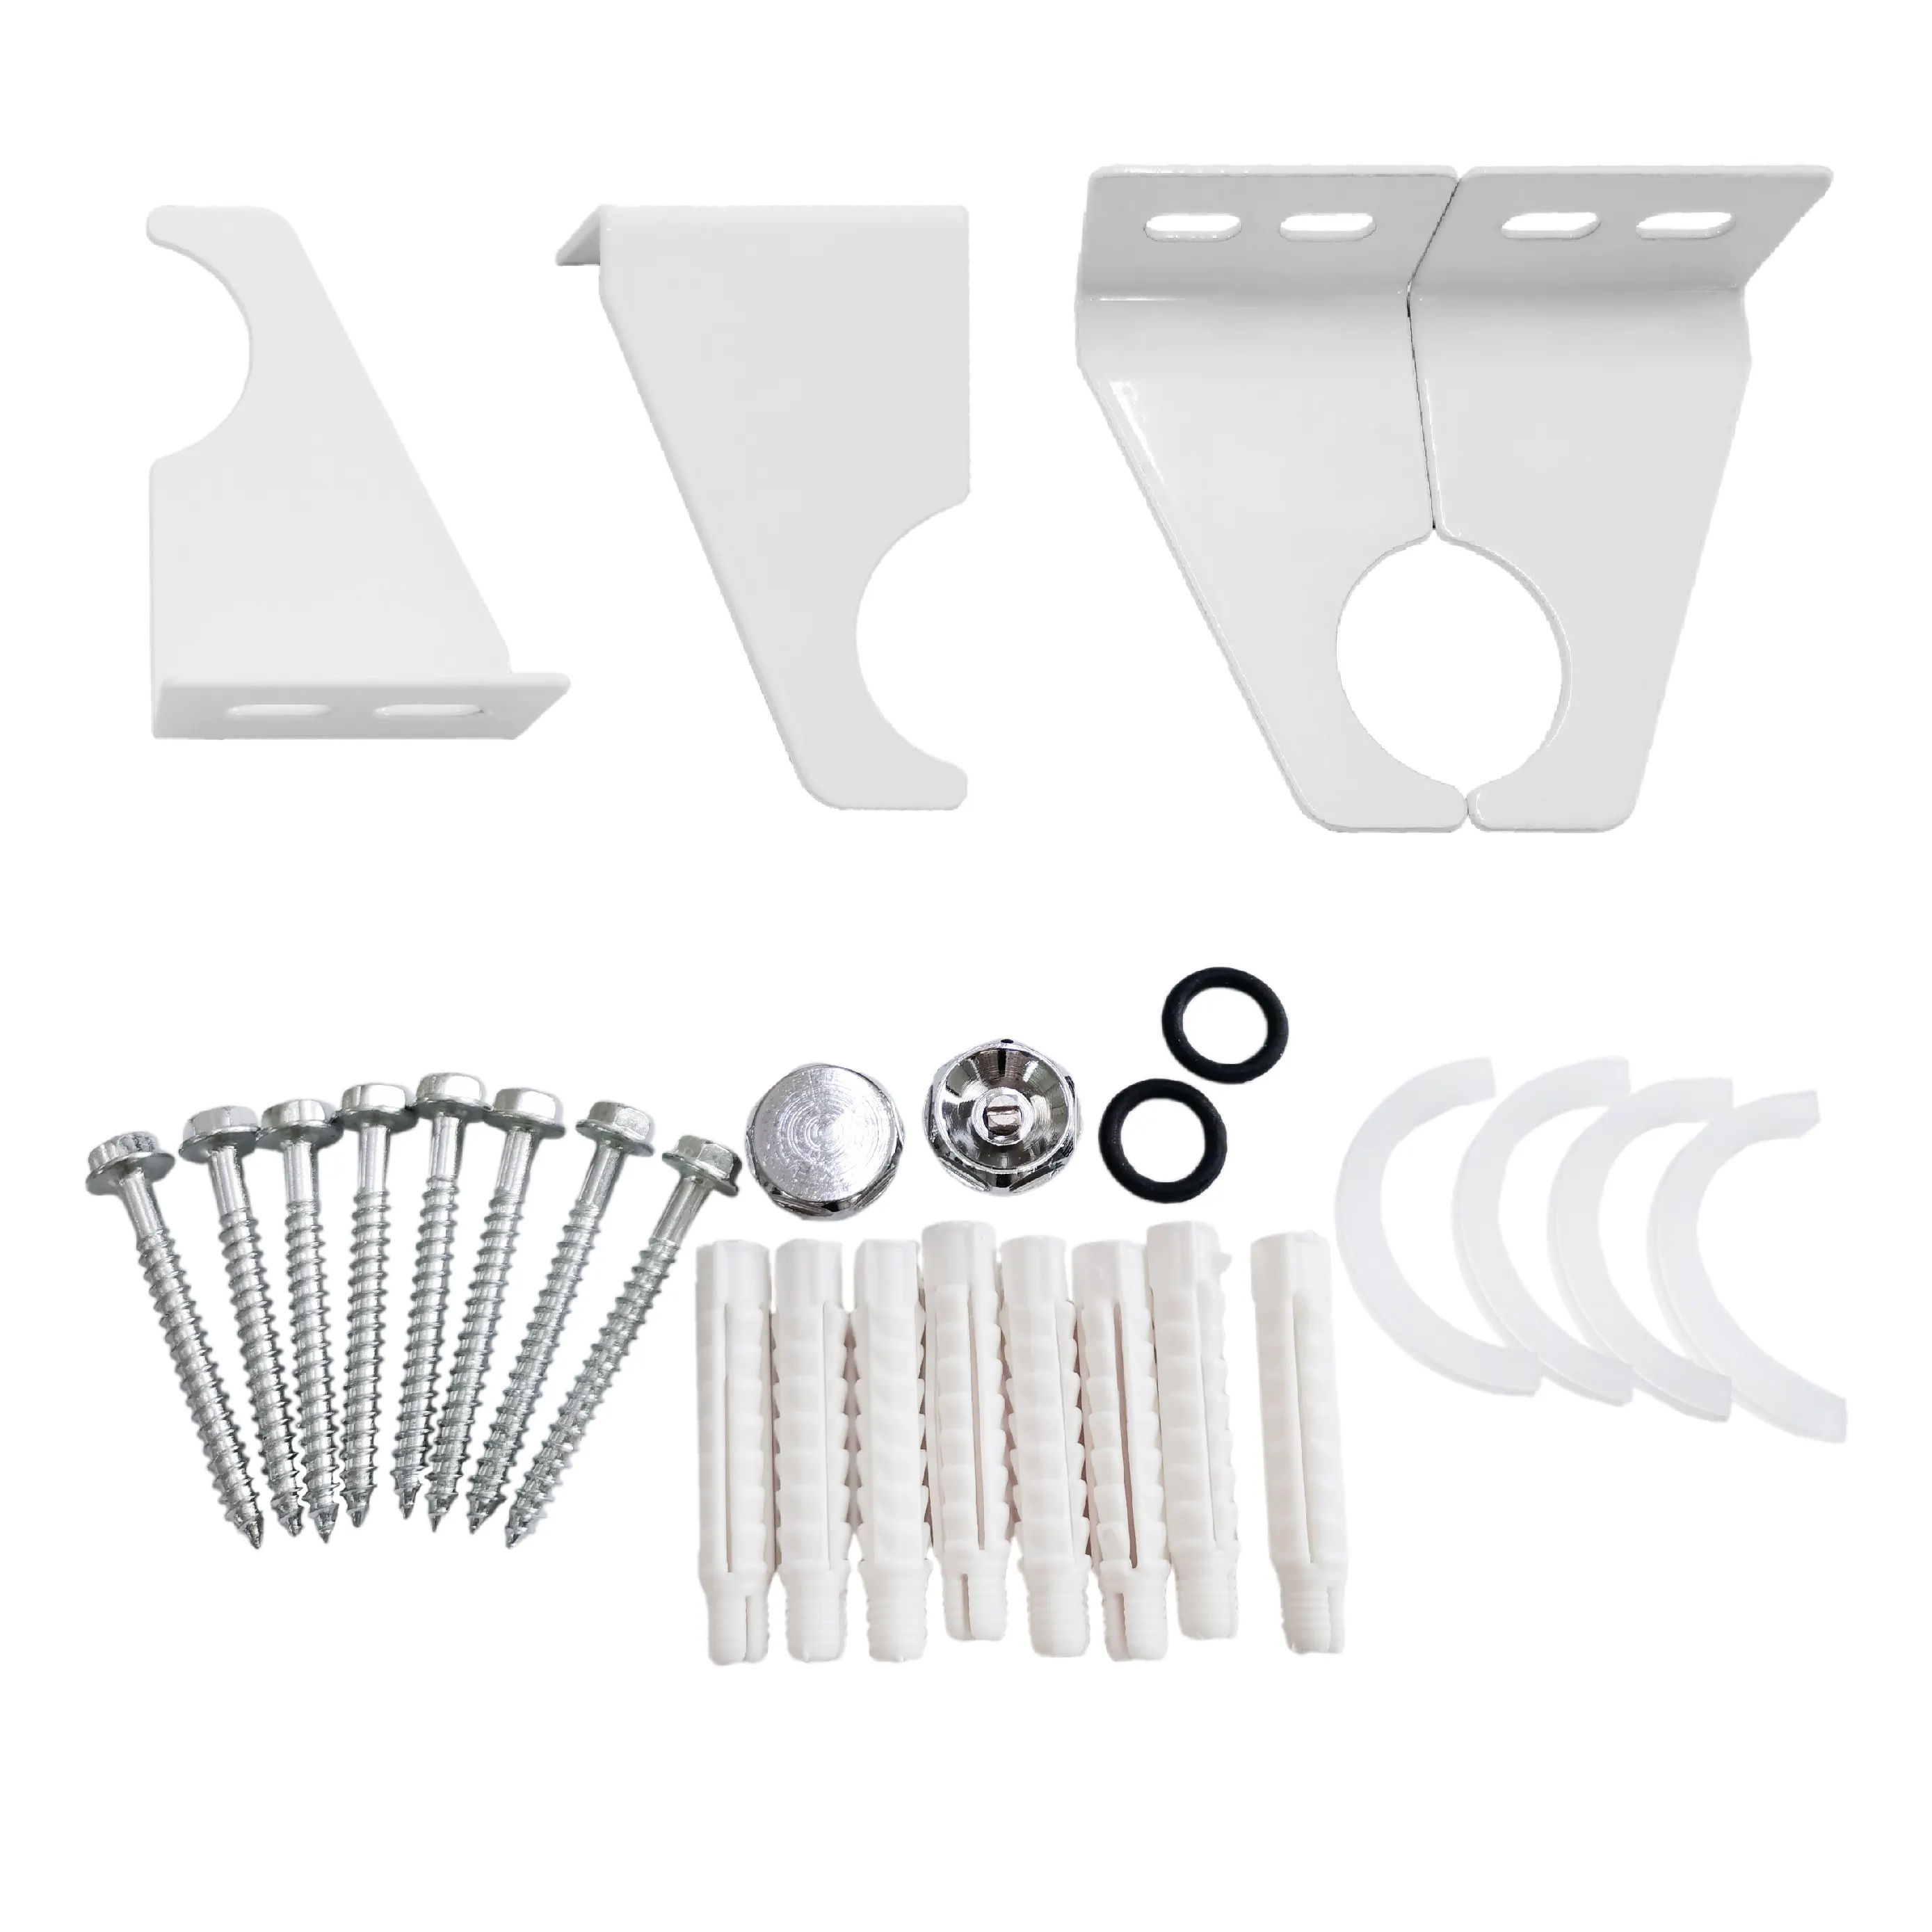 Good Selling Products A-1 Accessories Bracket Radiator Hooks Radiator For Water Heating